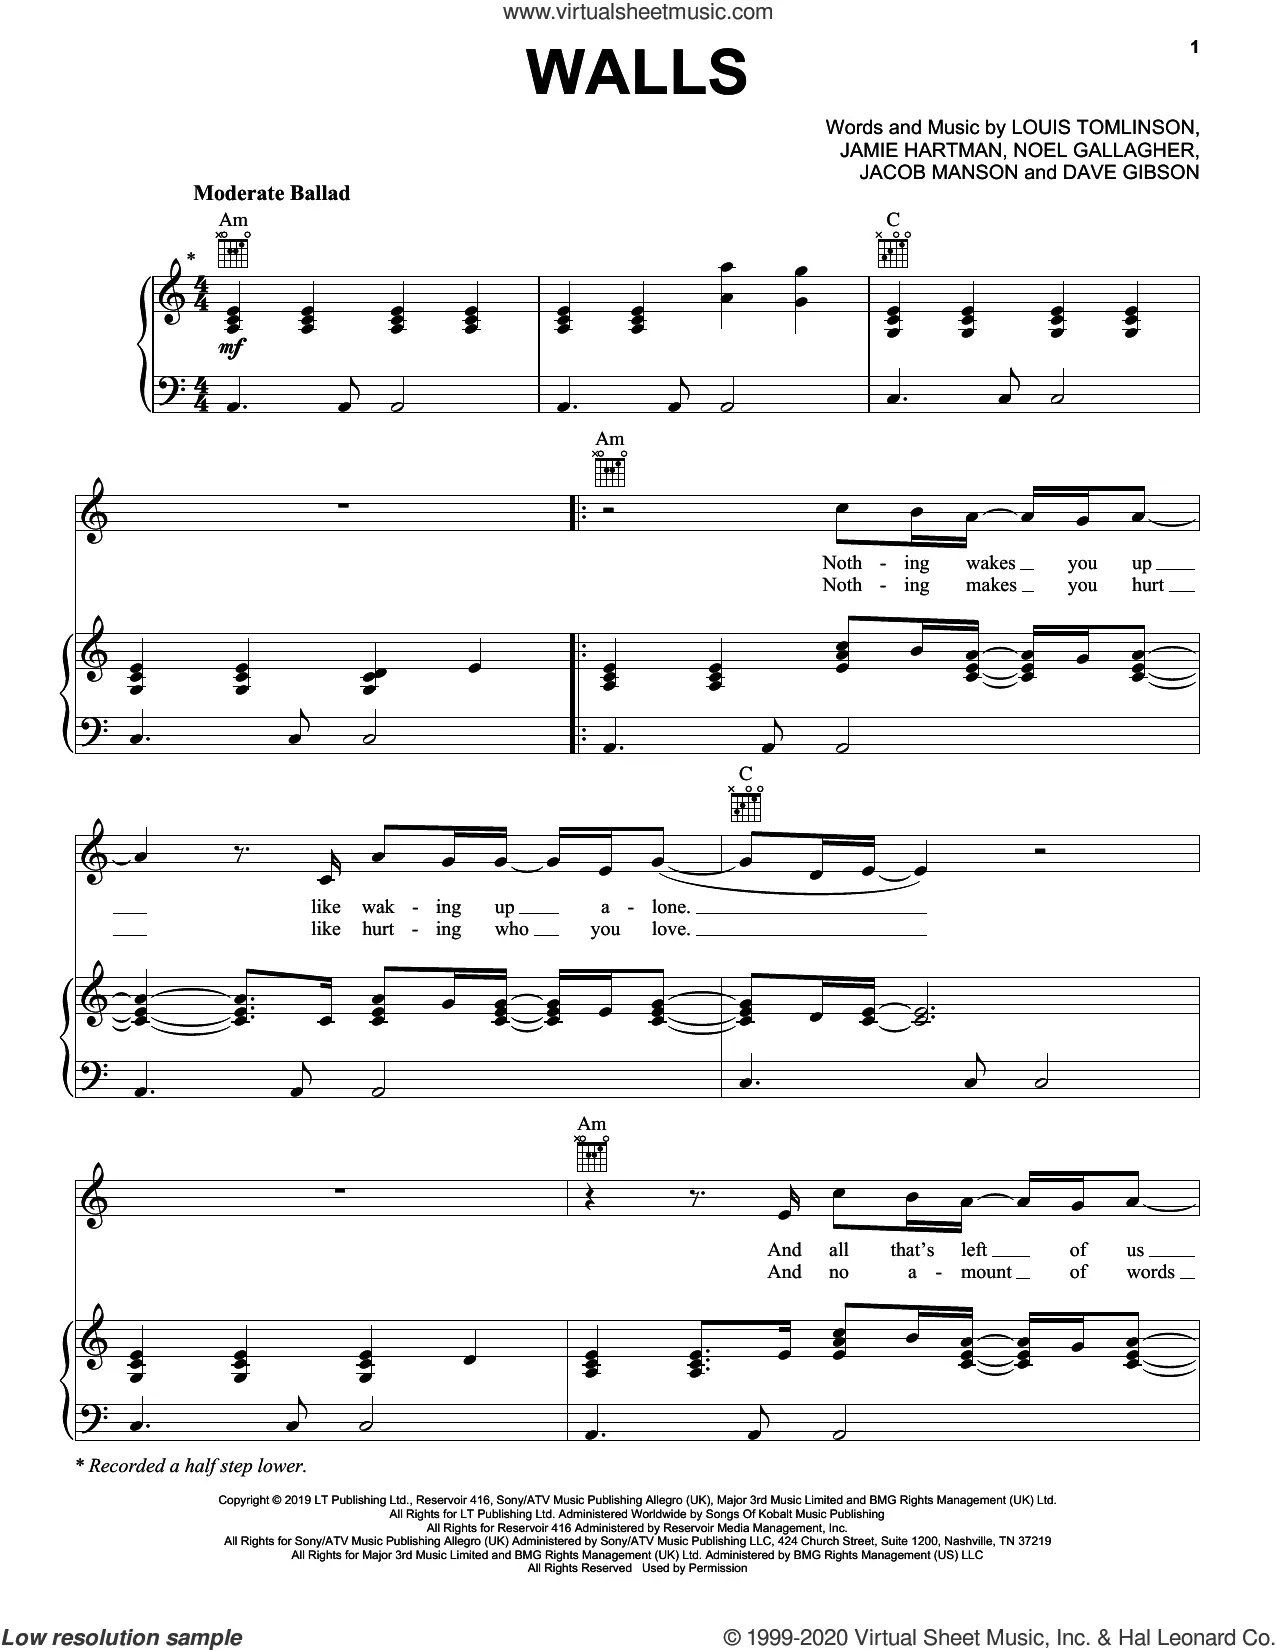 Back To You" Sheet Music by Louis Tomlinson; Bebe Rexha for Piano /Vocal/Chords - Sheet Music Now